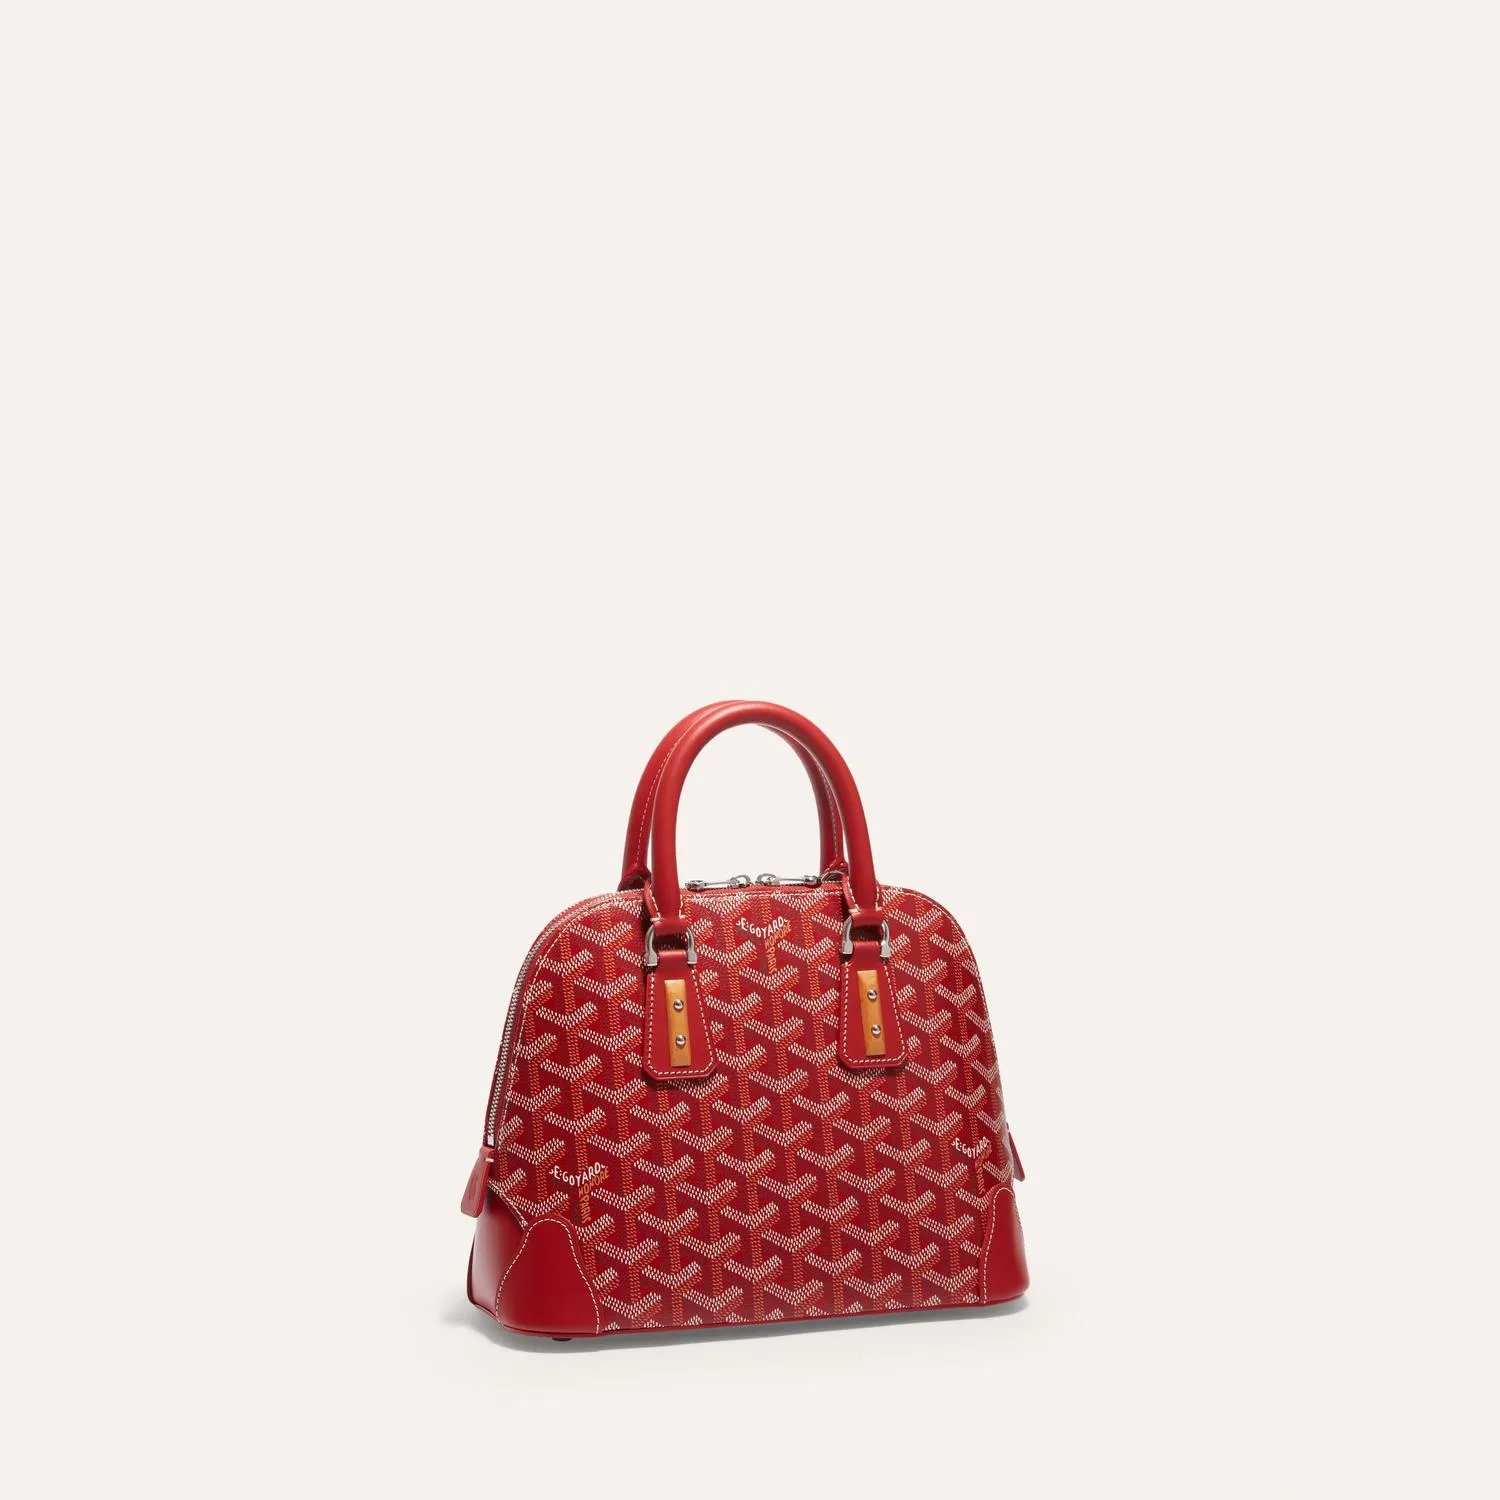 Goyard Vendome bag, all colors are wonderful, which one is your favorite? :  r/bestluxurybrand